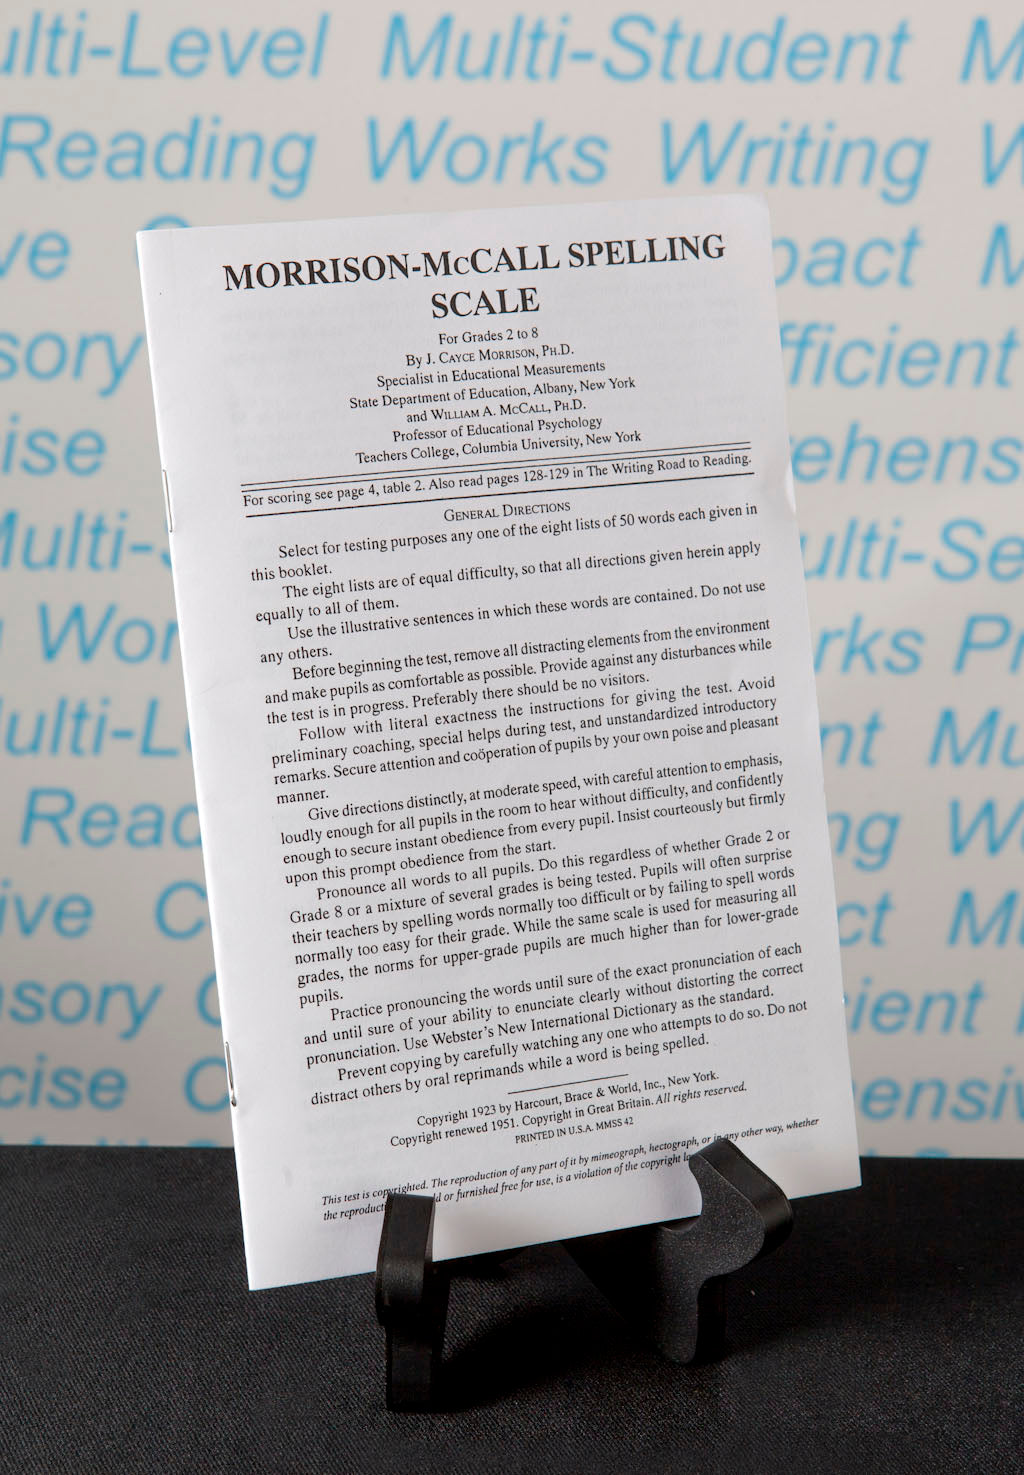 Morrison-McCall Spelling Scale